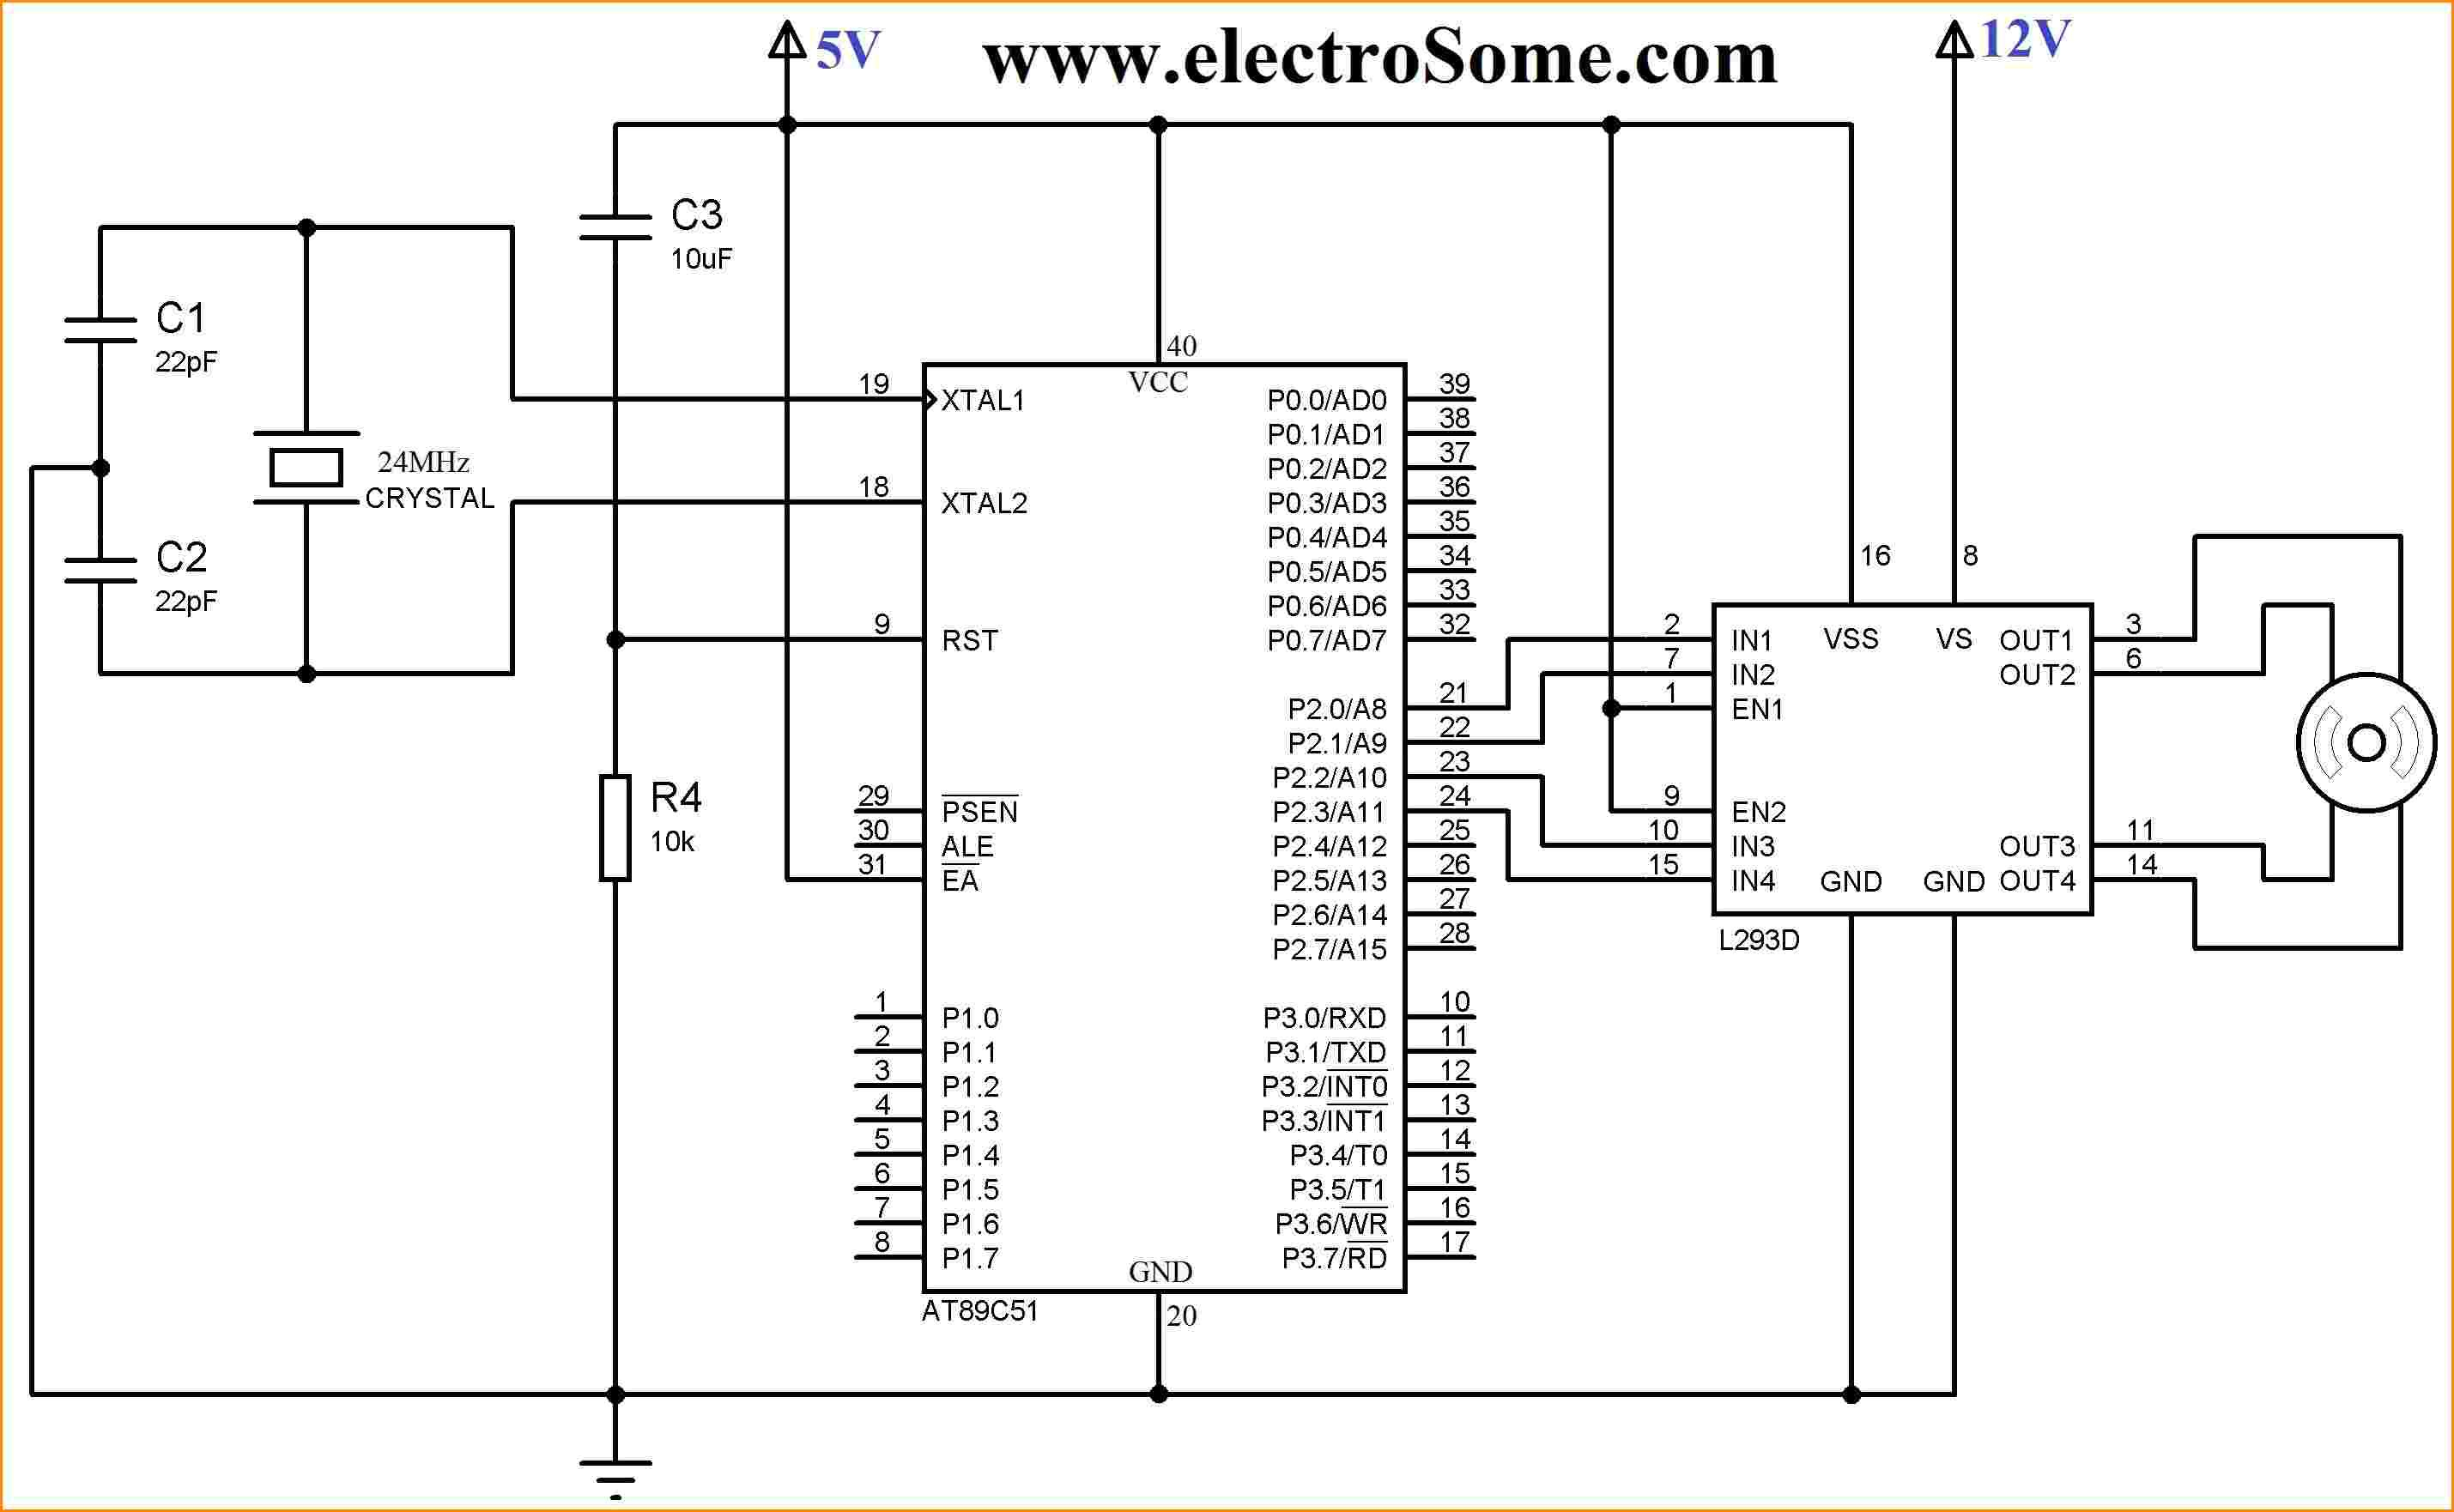 Q See Security Camera Wiring Diagram For | Wiring Diagram - Bunker Hill Security Camera Wiring Diagram